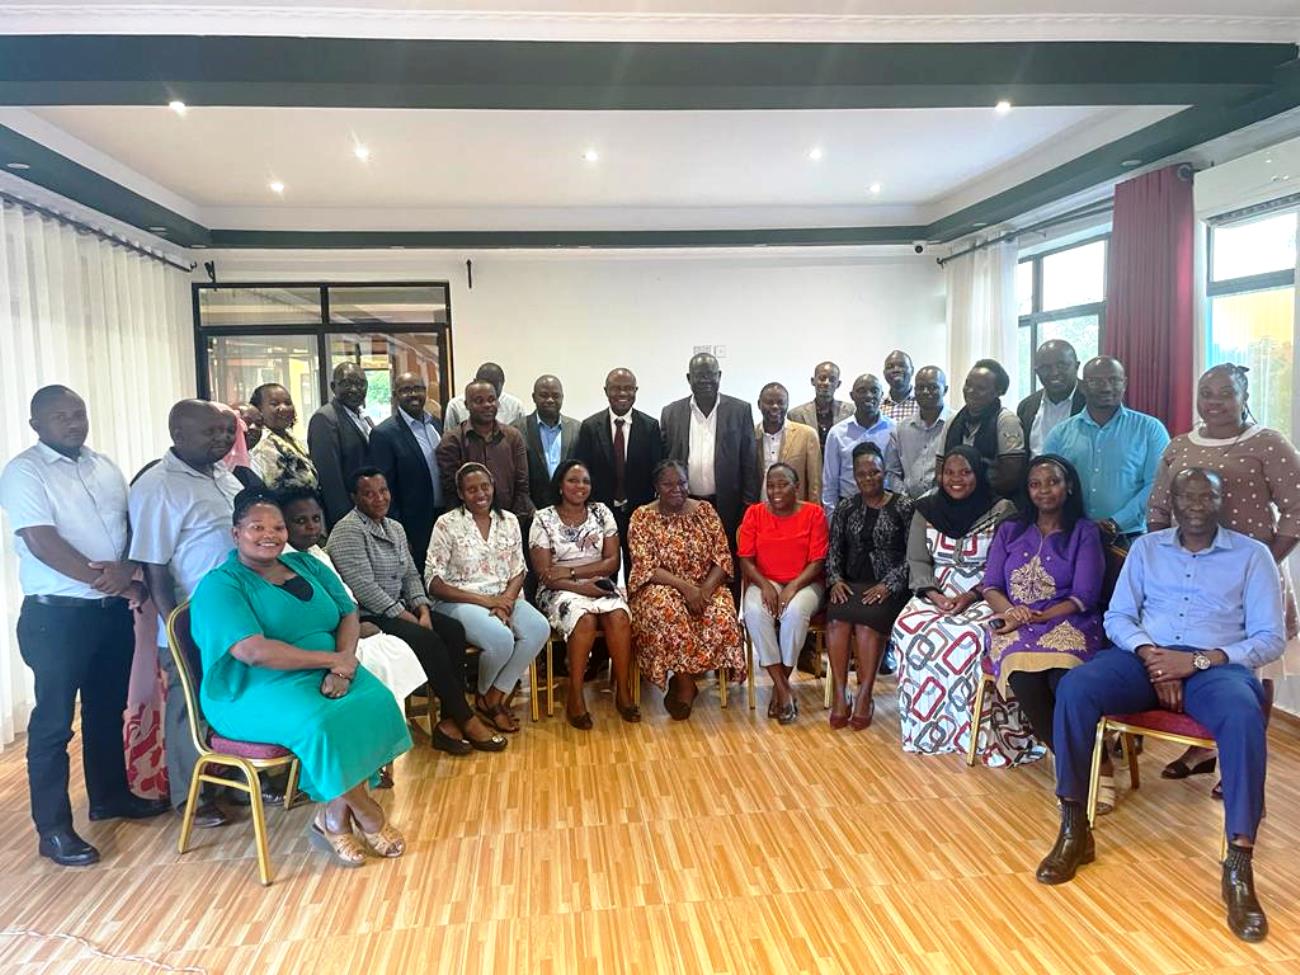 The Principal CoBAMS-Prof. Eria Hisali (Center in tie) with the Dean School of Business-Prof. Godfrey Akileng (To his Left) and School Staff during the retreat held 26th-27th June 2023 in Bunga, Kampala. Uganda